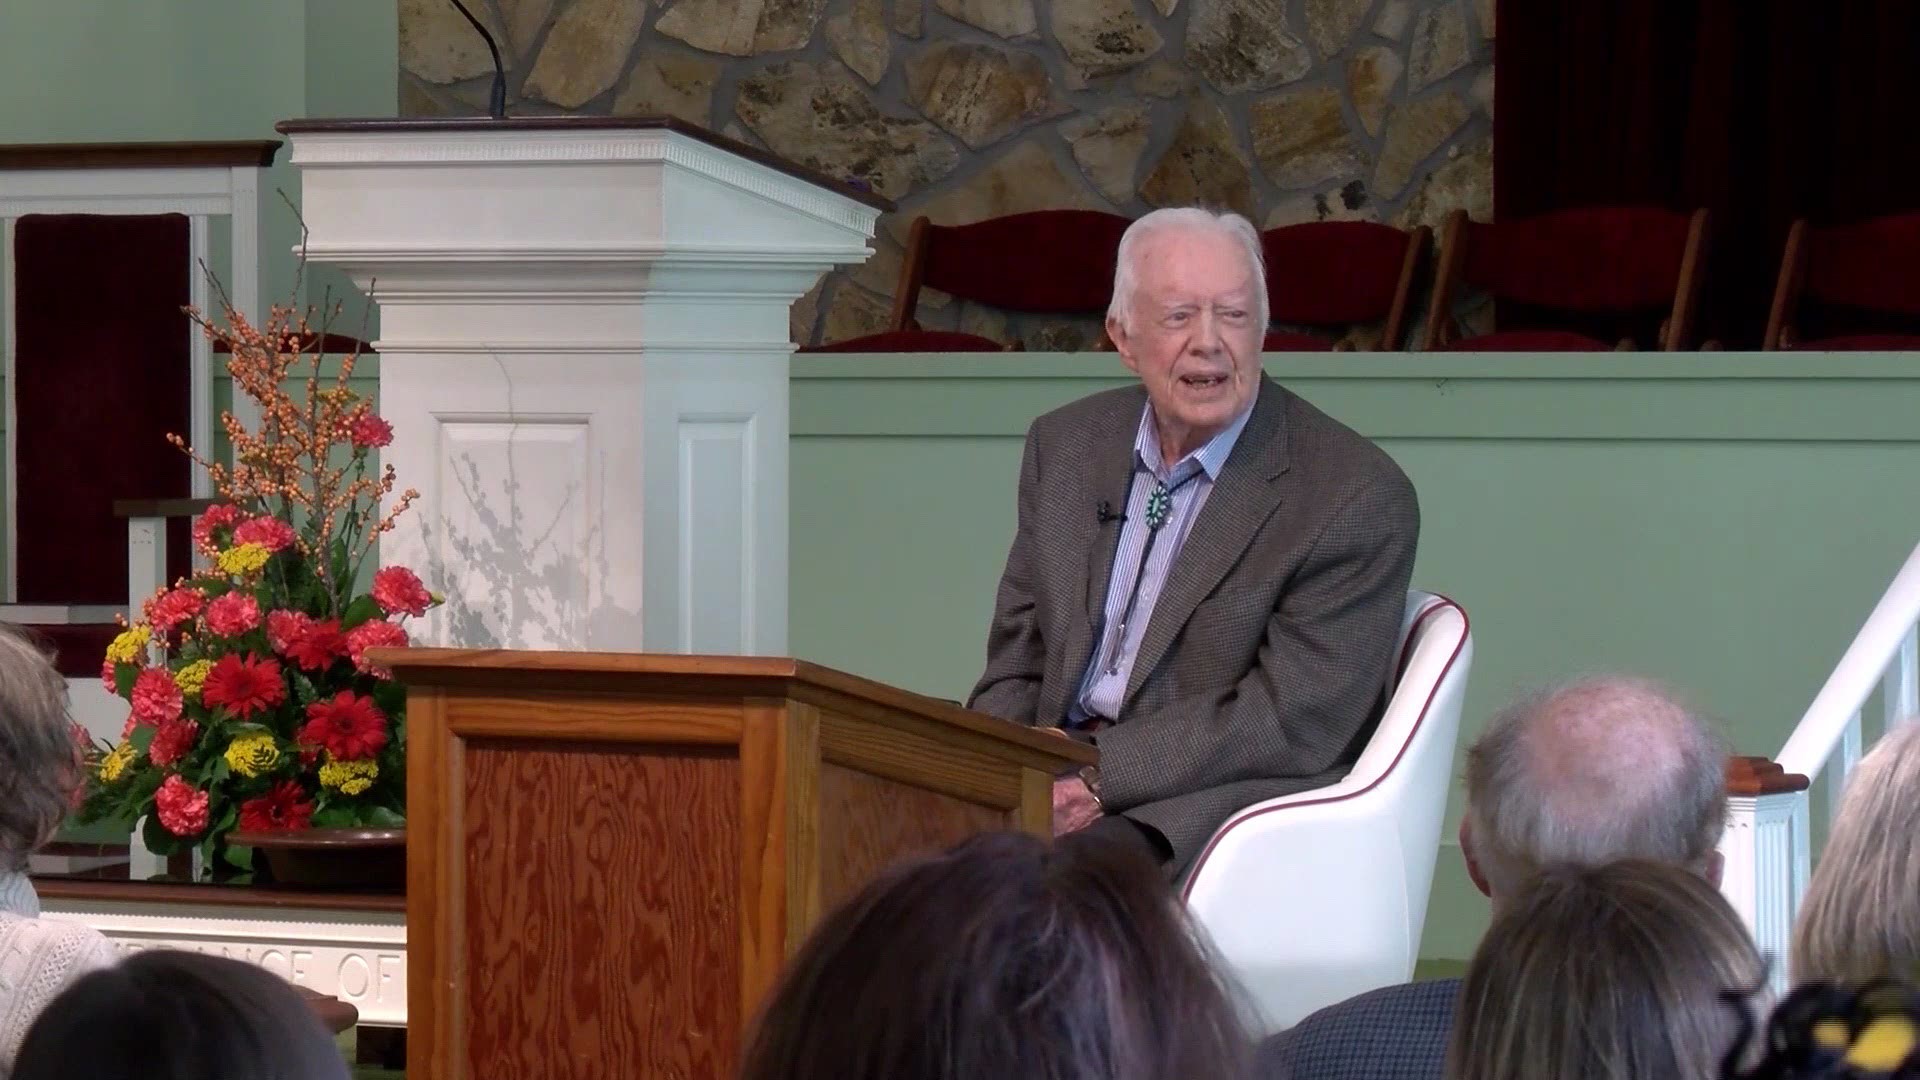 Former President Jimmy Carter taught a Bible lesson on life after death Sunday less than two weeks after breaking his pelvis in a fall.